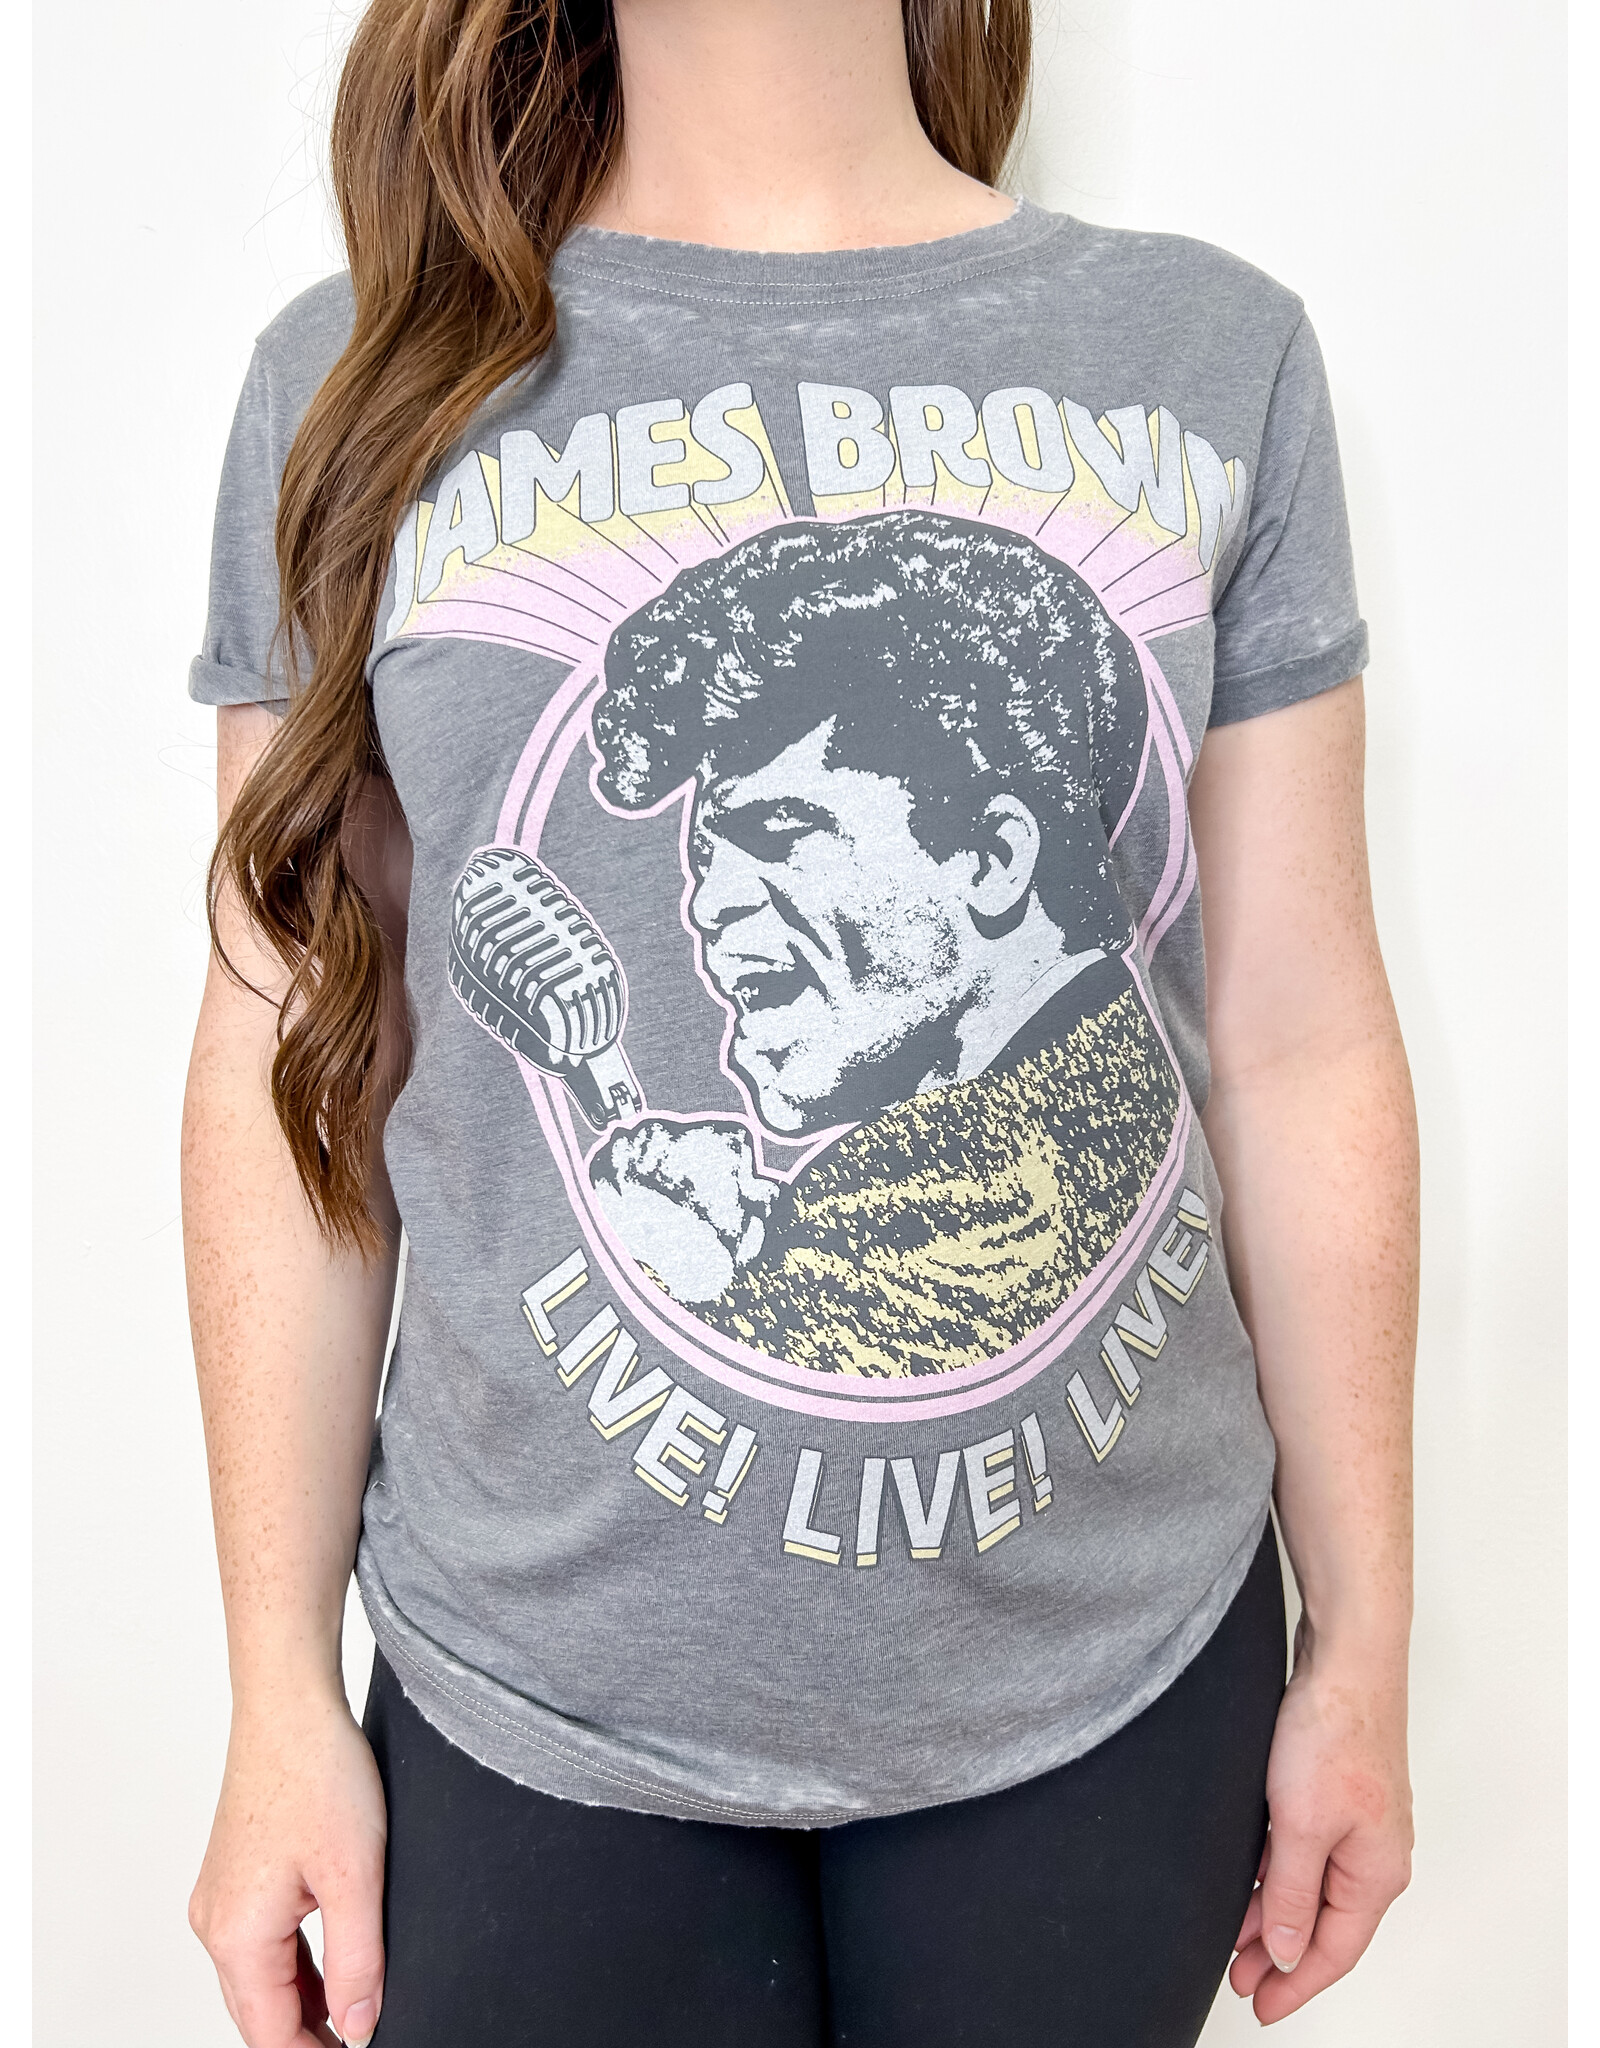 James Brown Live Burn Out Tee